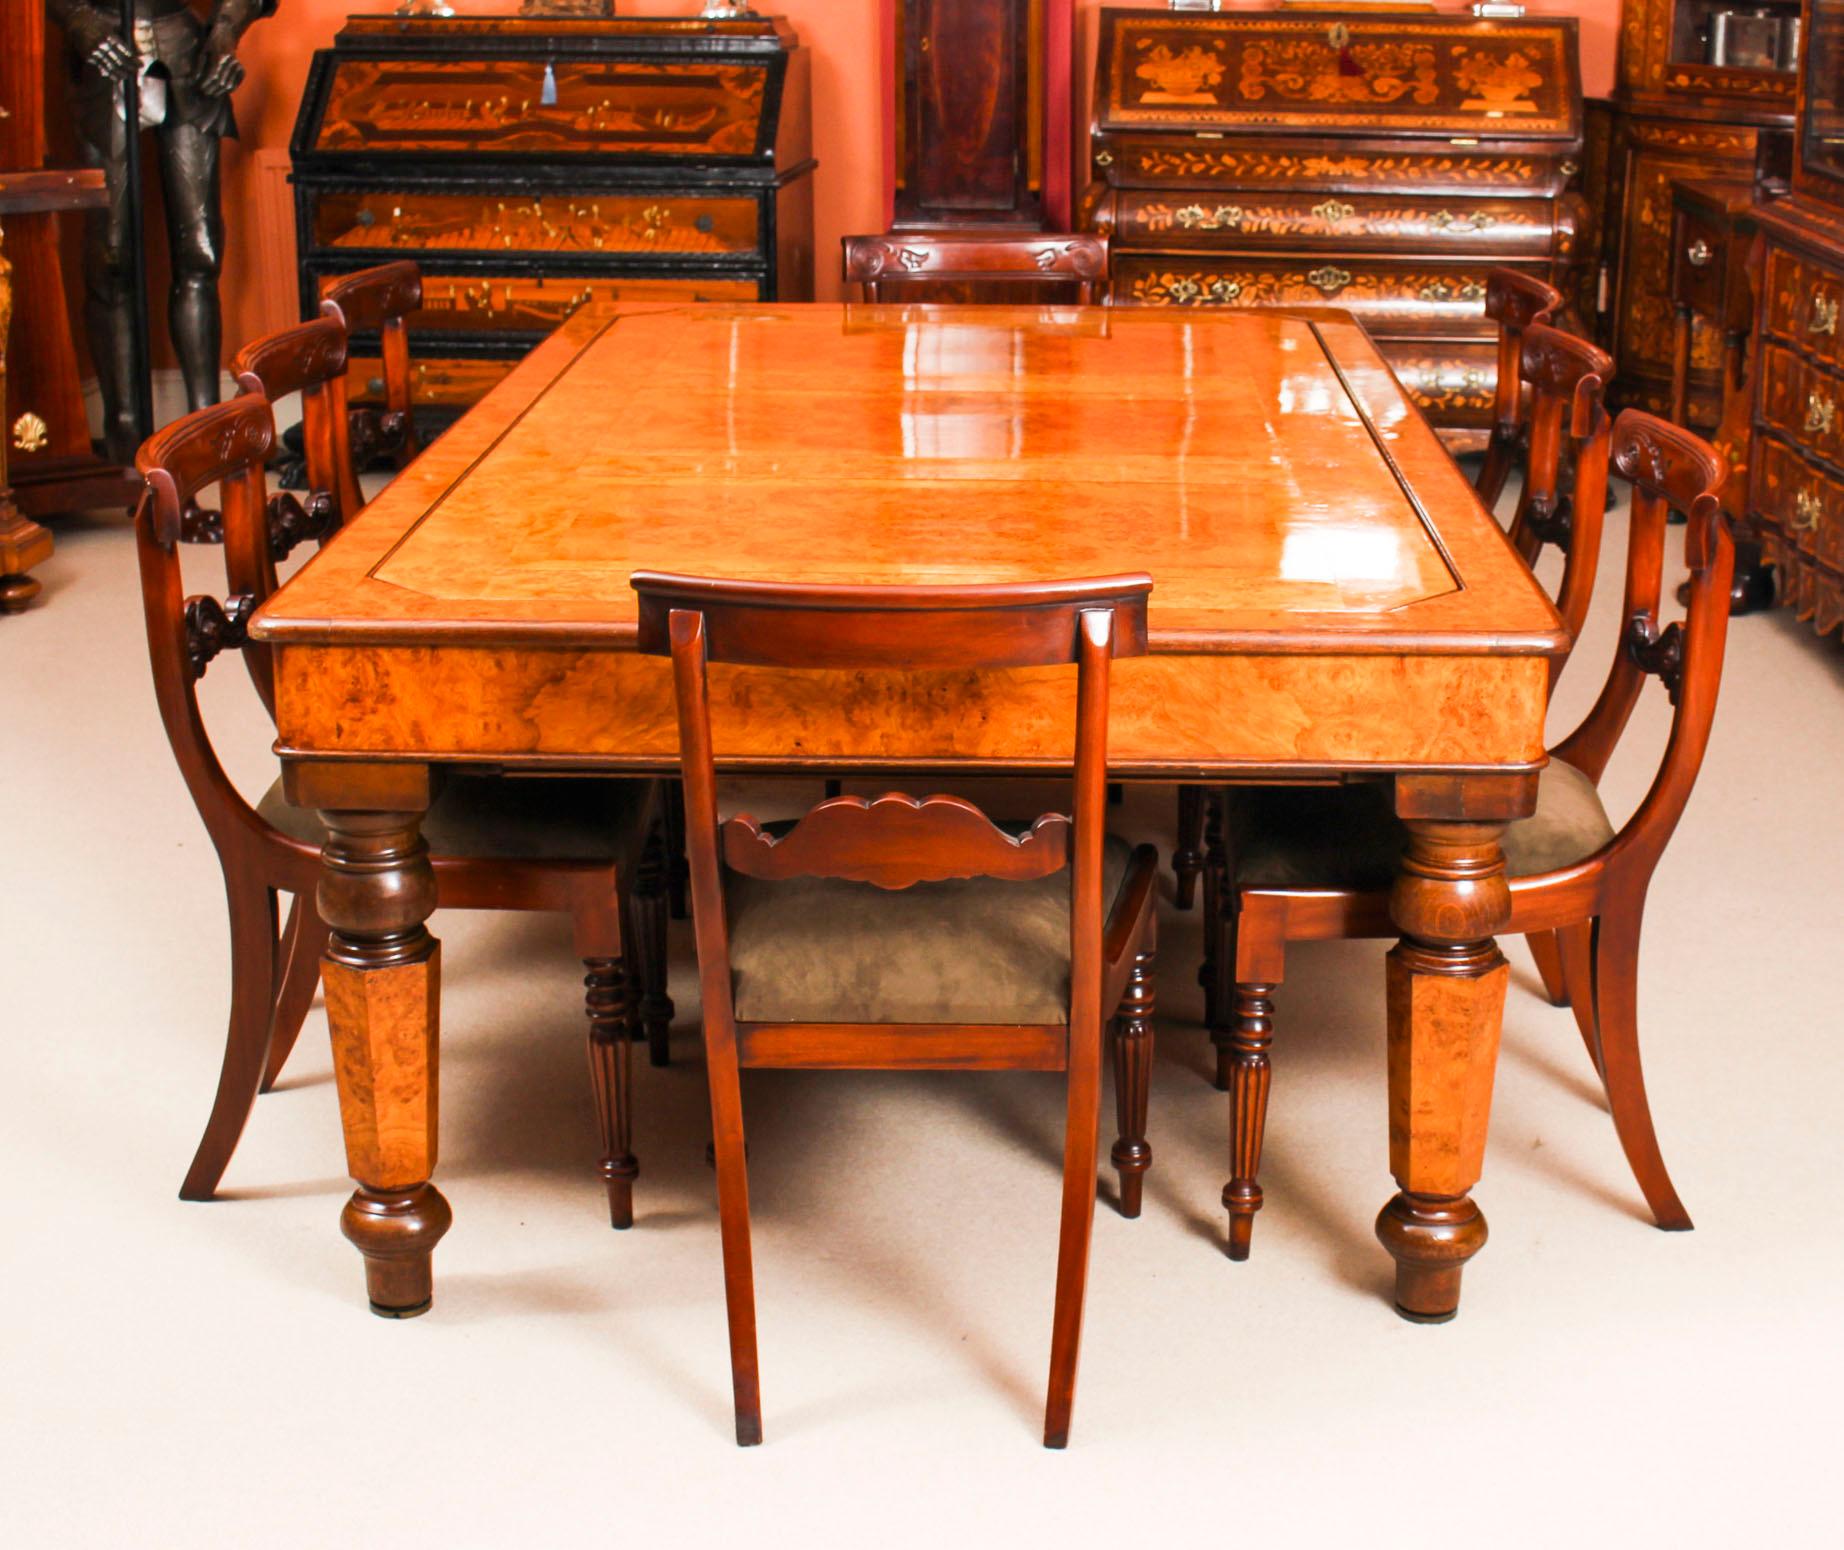 There is no mistaking the style and sophisticated design of this exquisite and rare English Victorian Pollard oak revolving (or rollover) snooker dining table with score board, circa 1870 in date, and eight chairs. 

The table bearing an ivorine